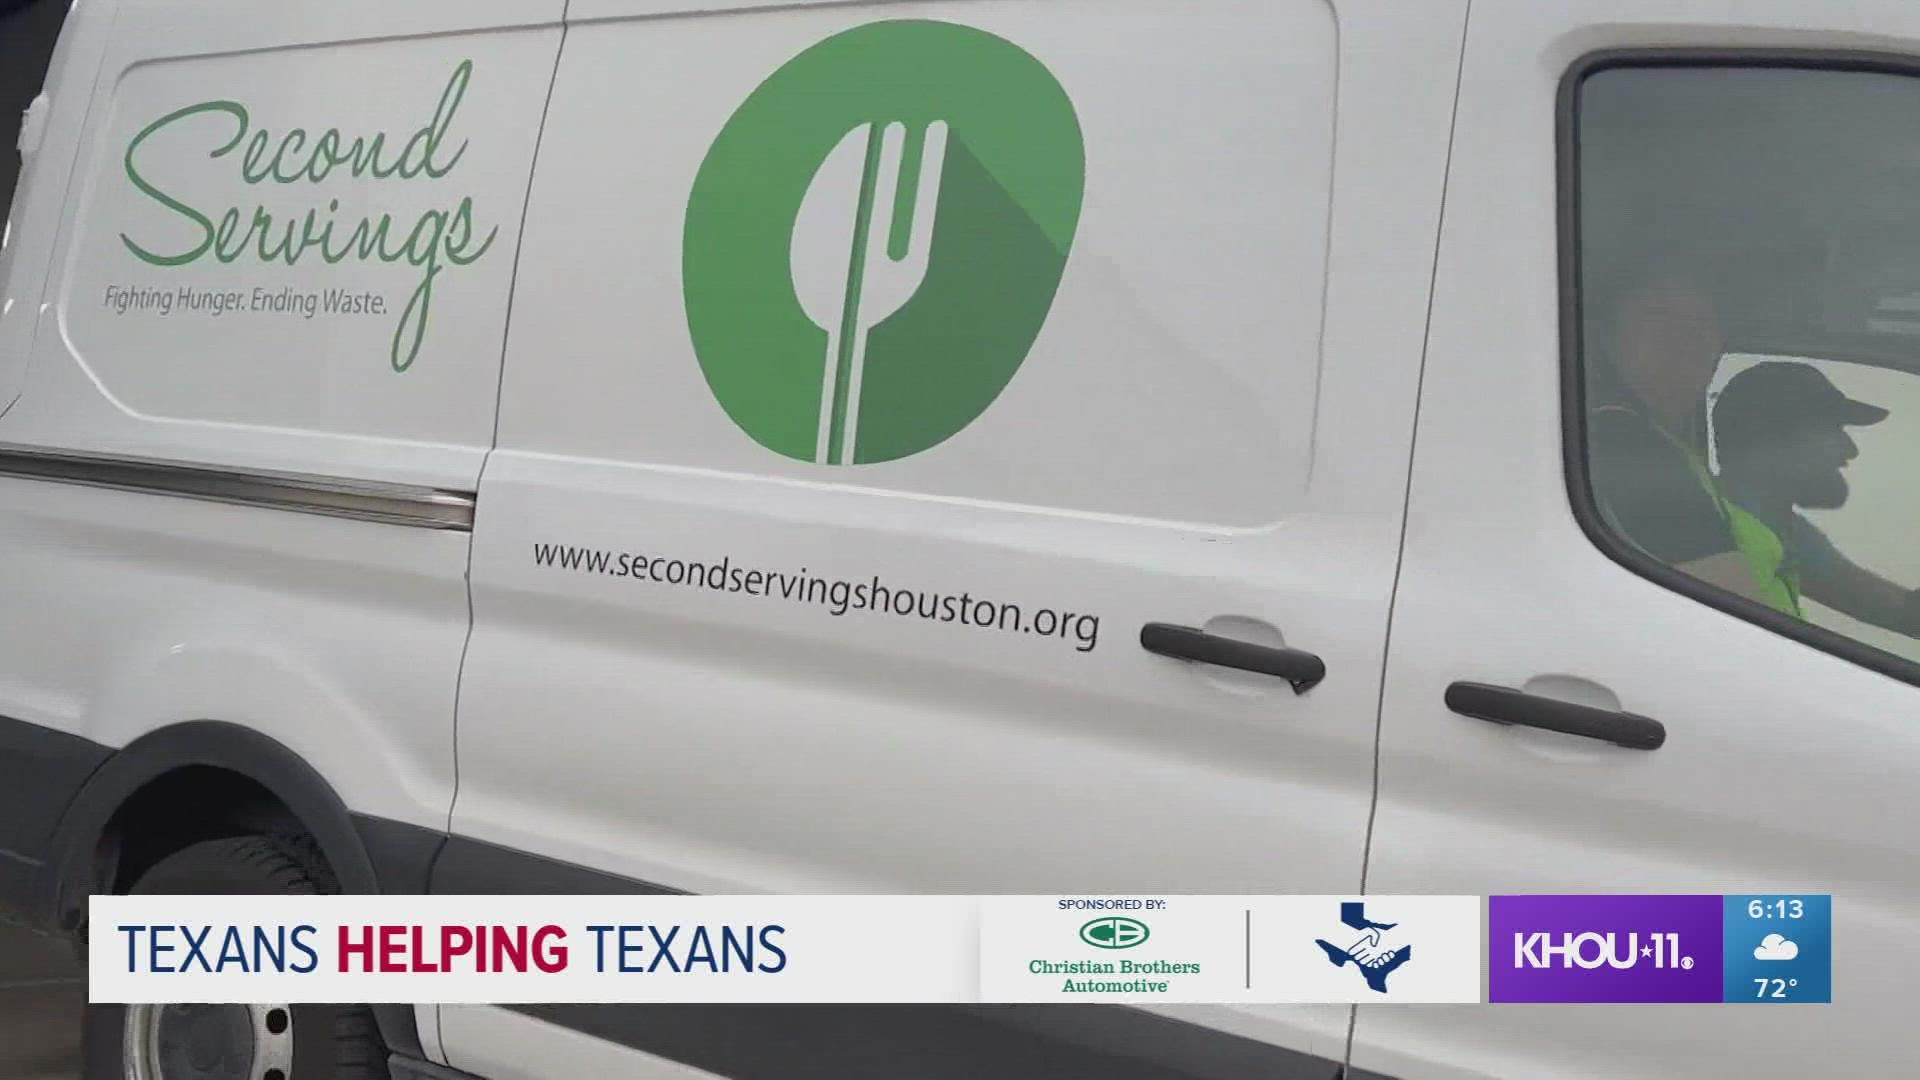 Seconds Servings of Houston, a nonprofit organization, tries to recover as much fresh food as possible from grocery stores and restaurants and give to people in need